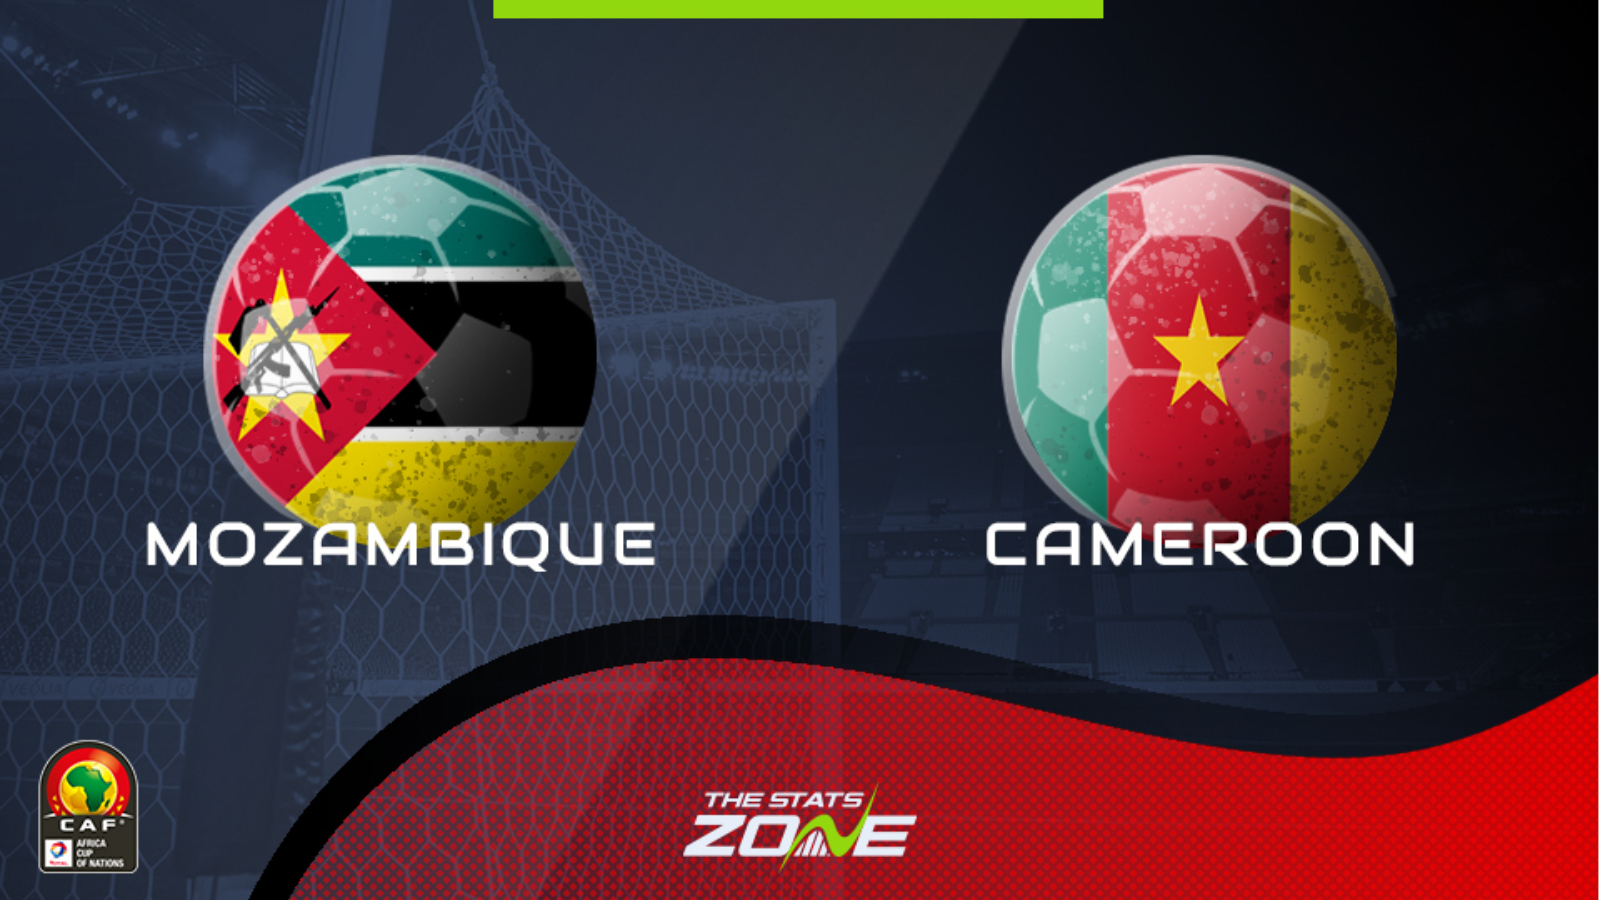 2022 Africa Cup of Nations Qualifiers – Mozambique vs Cameroon Preview